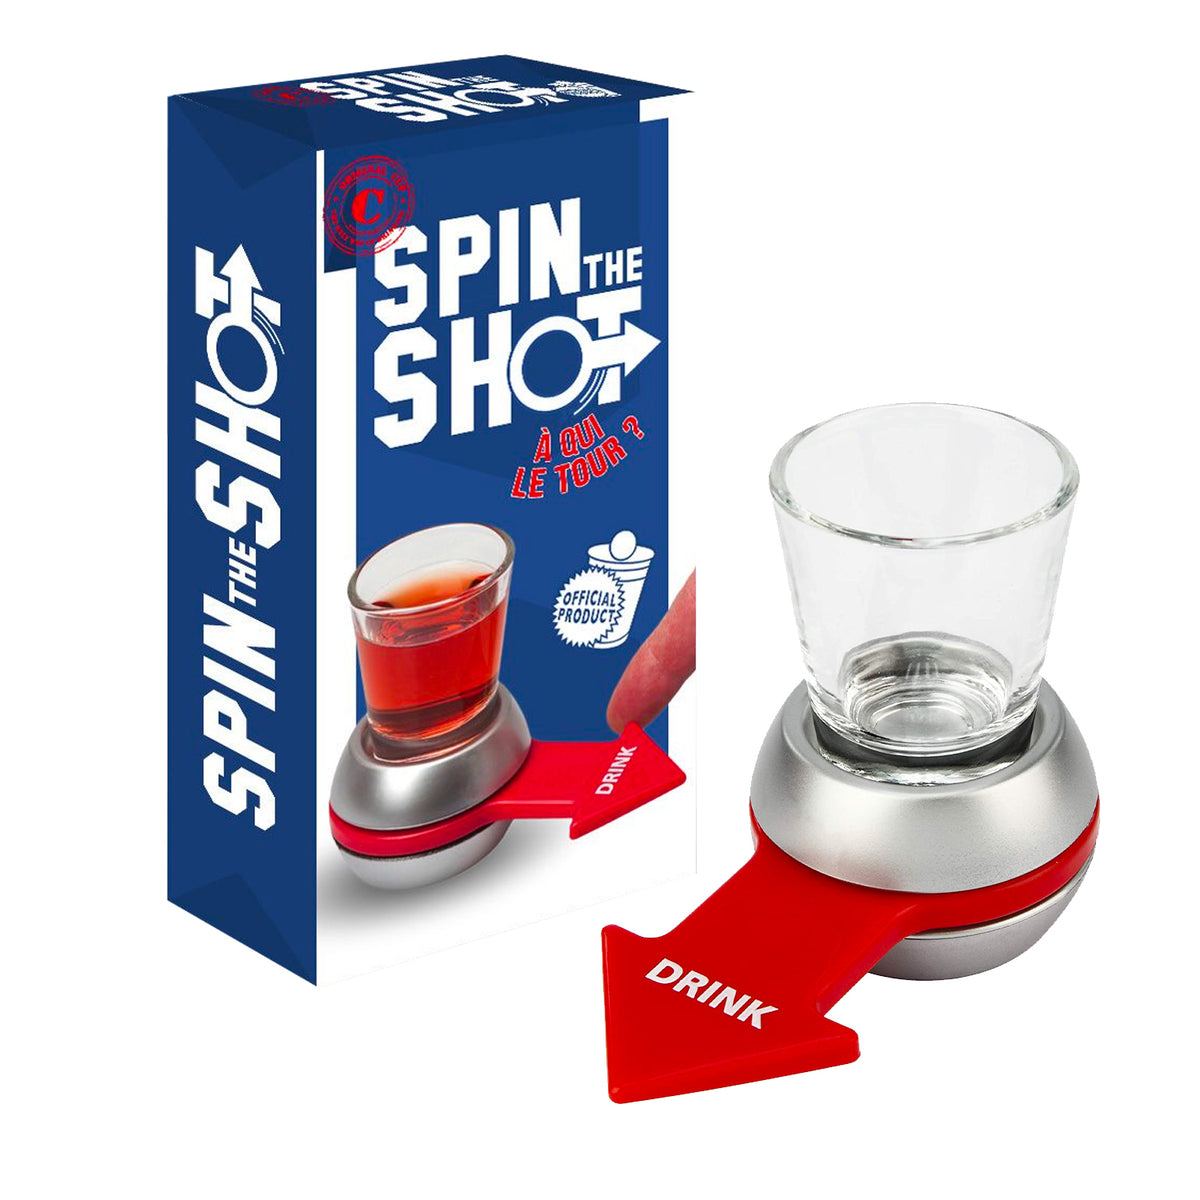 Spin the Shot – ORIGINAL CUP